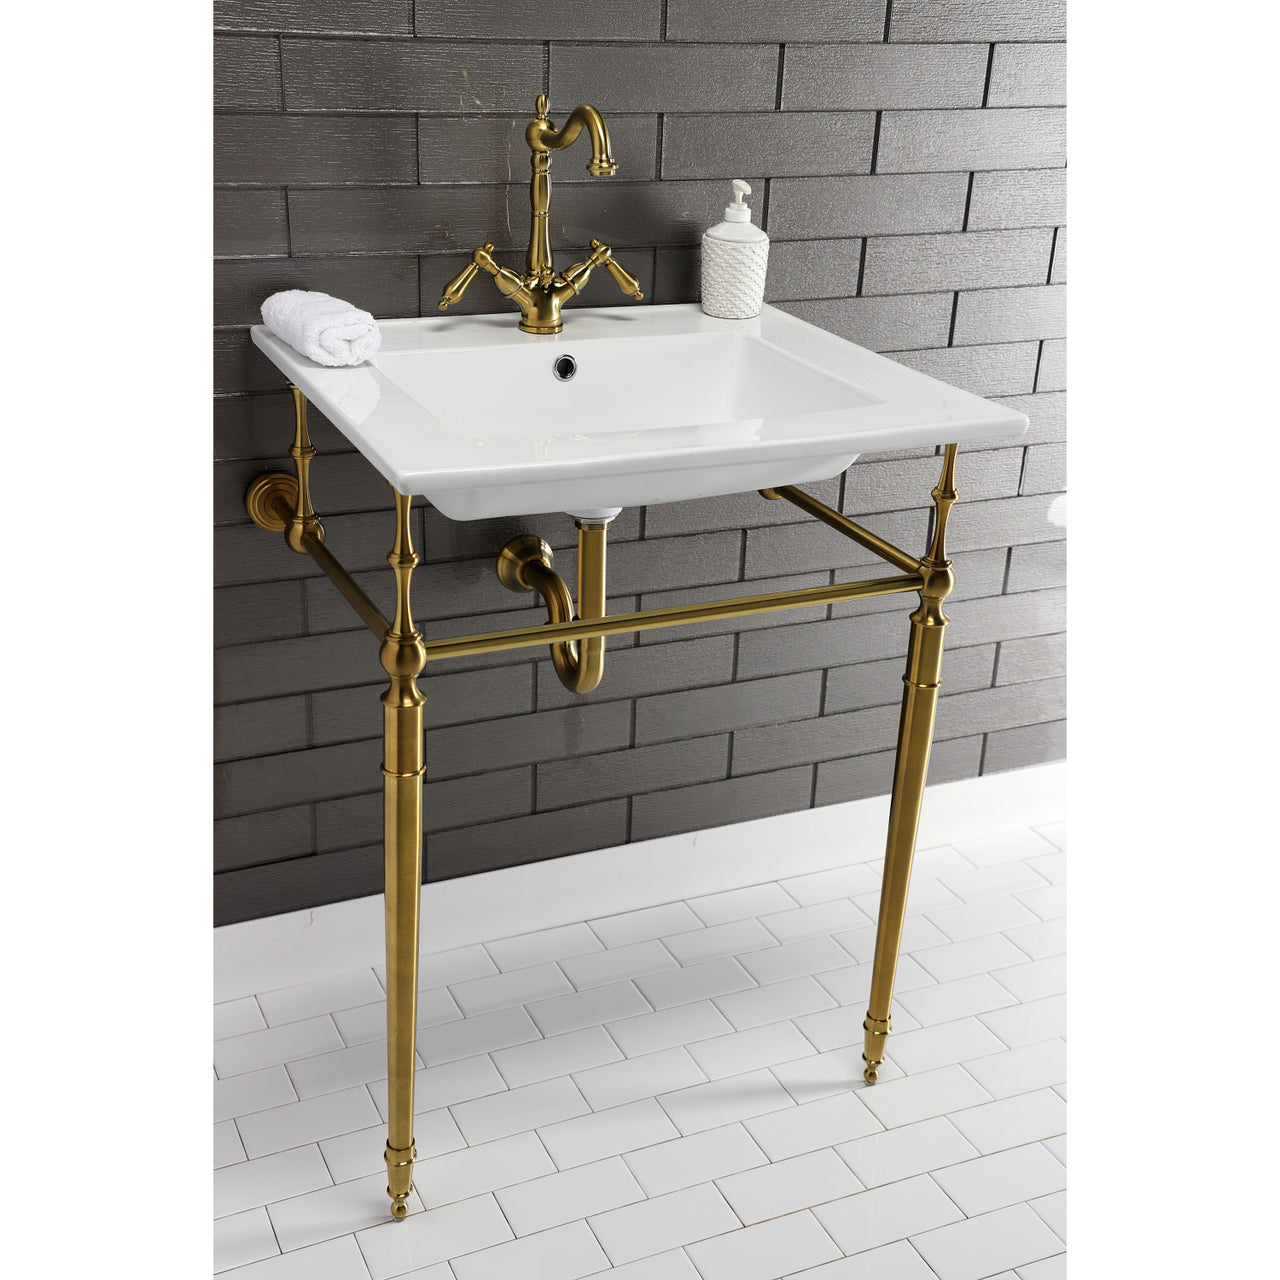 Continental 25 X 22 Ceramic Vanity Sink Top w/Integrated Basin - BNGBath